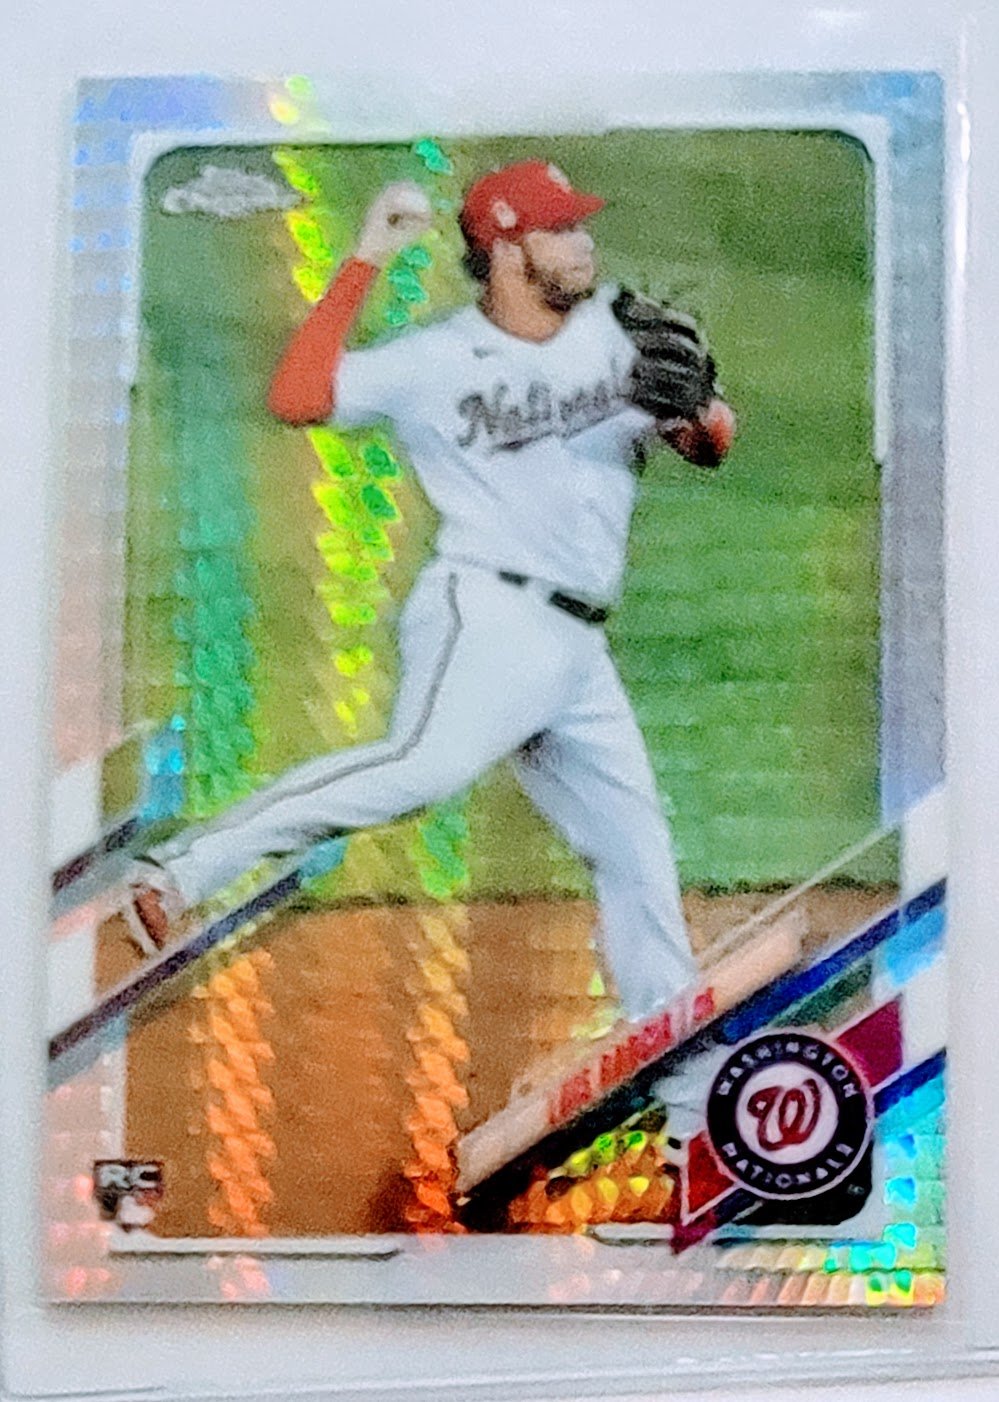 2021 Topps Chrome Luis Garcia Rookie Refractor Baseball Card TPTV simple Xclusive Collectibles   